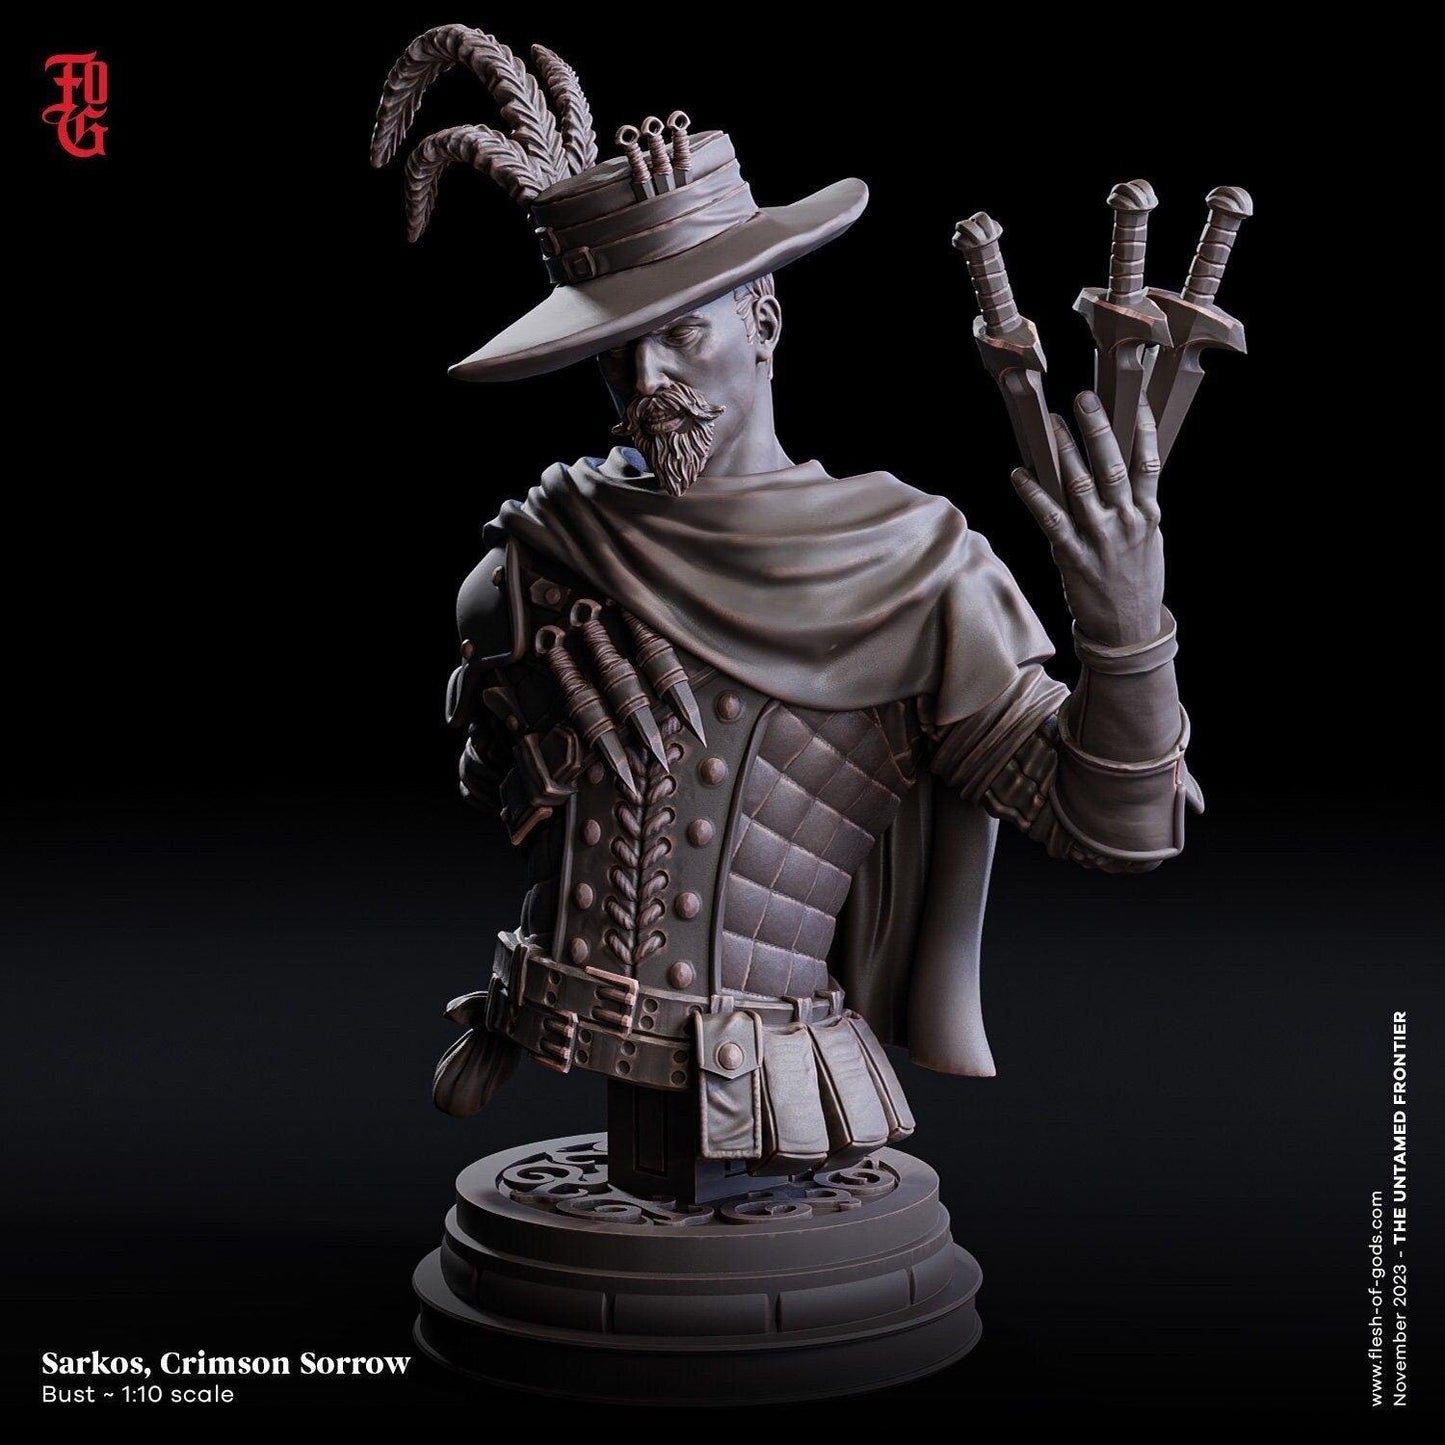 Sarkos, the Crimson Sorrow | Outlaw Cowboy Wild West Miniature for DnD 5e | 32mm Scale or 75mm Scale - Plague Miniatures shop for DnD Miniatures